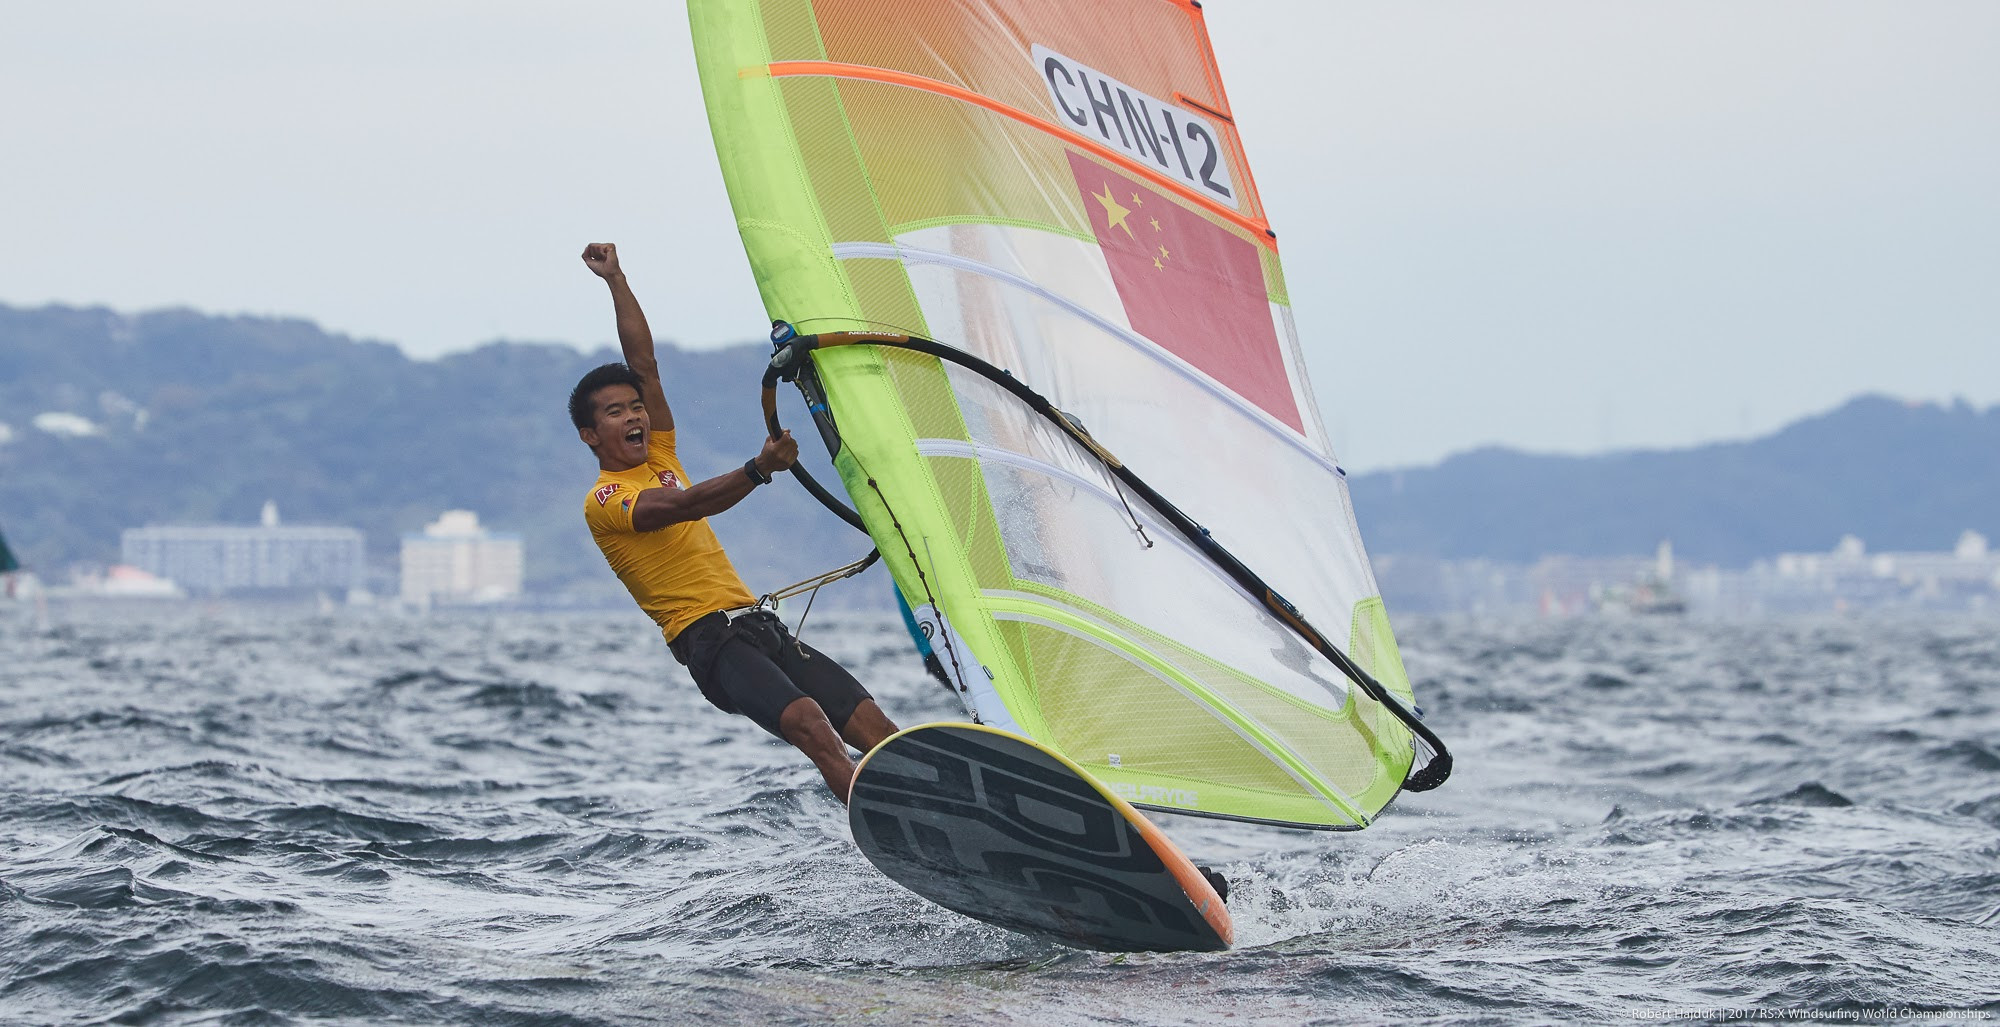 Bing Ye sealed a second Chinese gold at the RS:X World Windsurfing Championships ©RS:X World Windsurfing Championships